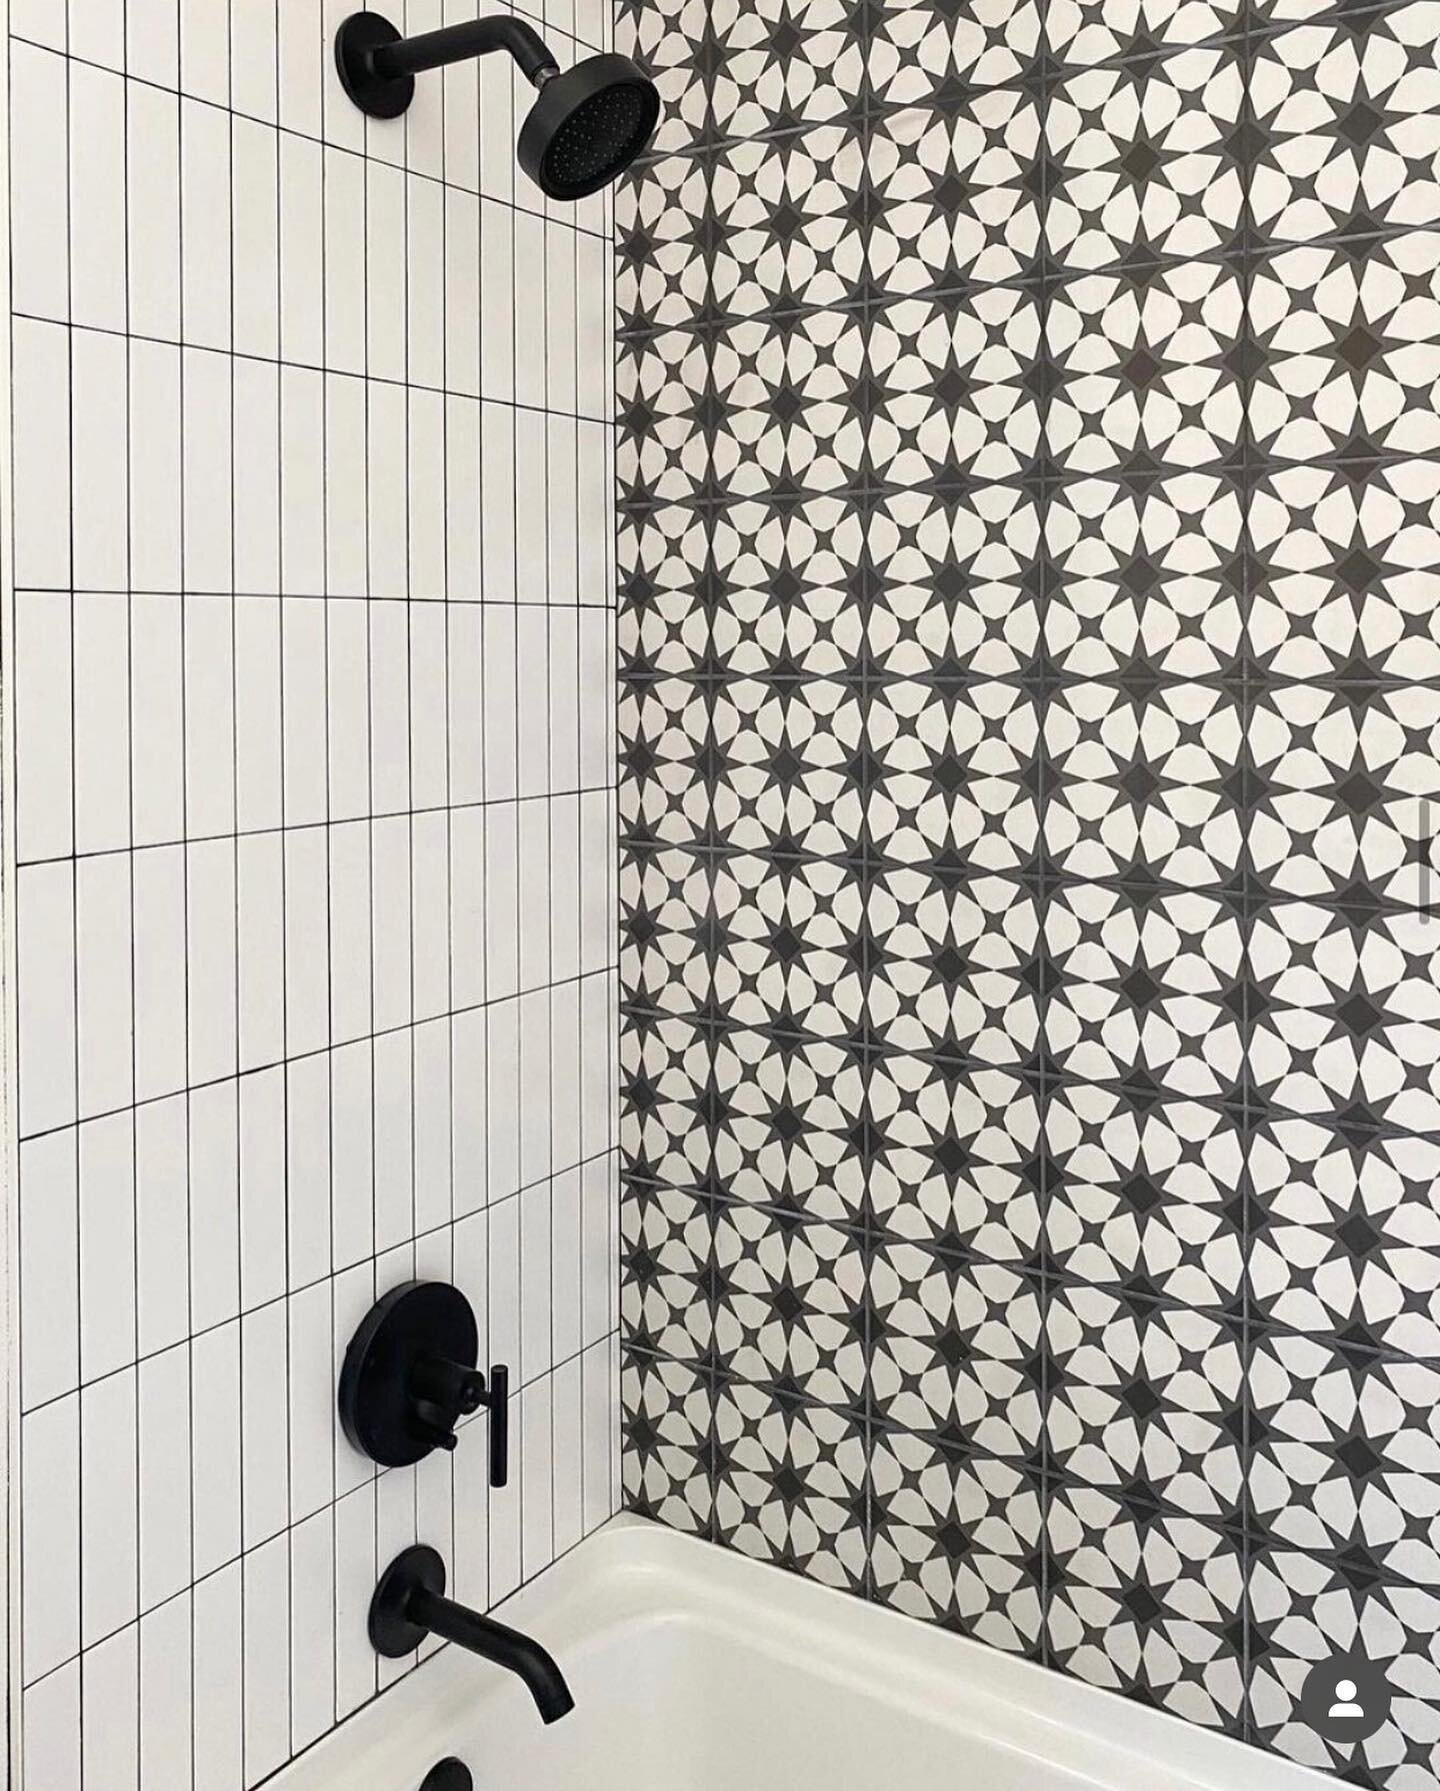 This patterned accent wall gives the kids bath such a fun twist! Anything to make bath time more fun, right?
Accent wall: @americanolean D_Segni Blend M0UN 8x8
Side walls: @daltile Color Wheel Classics Arctic White Matte 2x8
.
.
.
.
.
#interiordesign